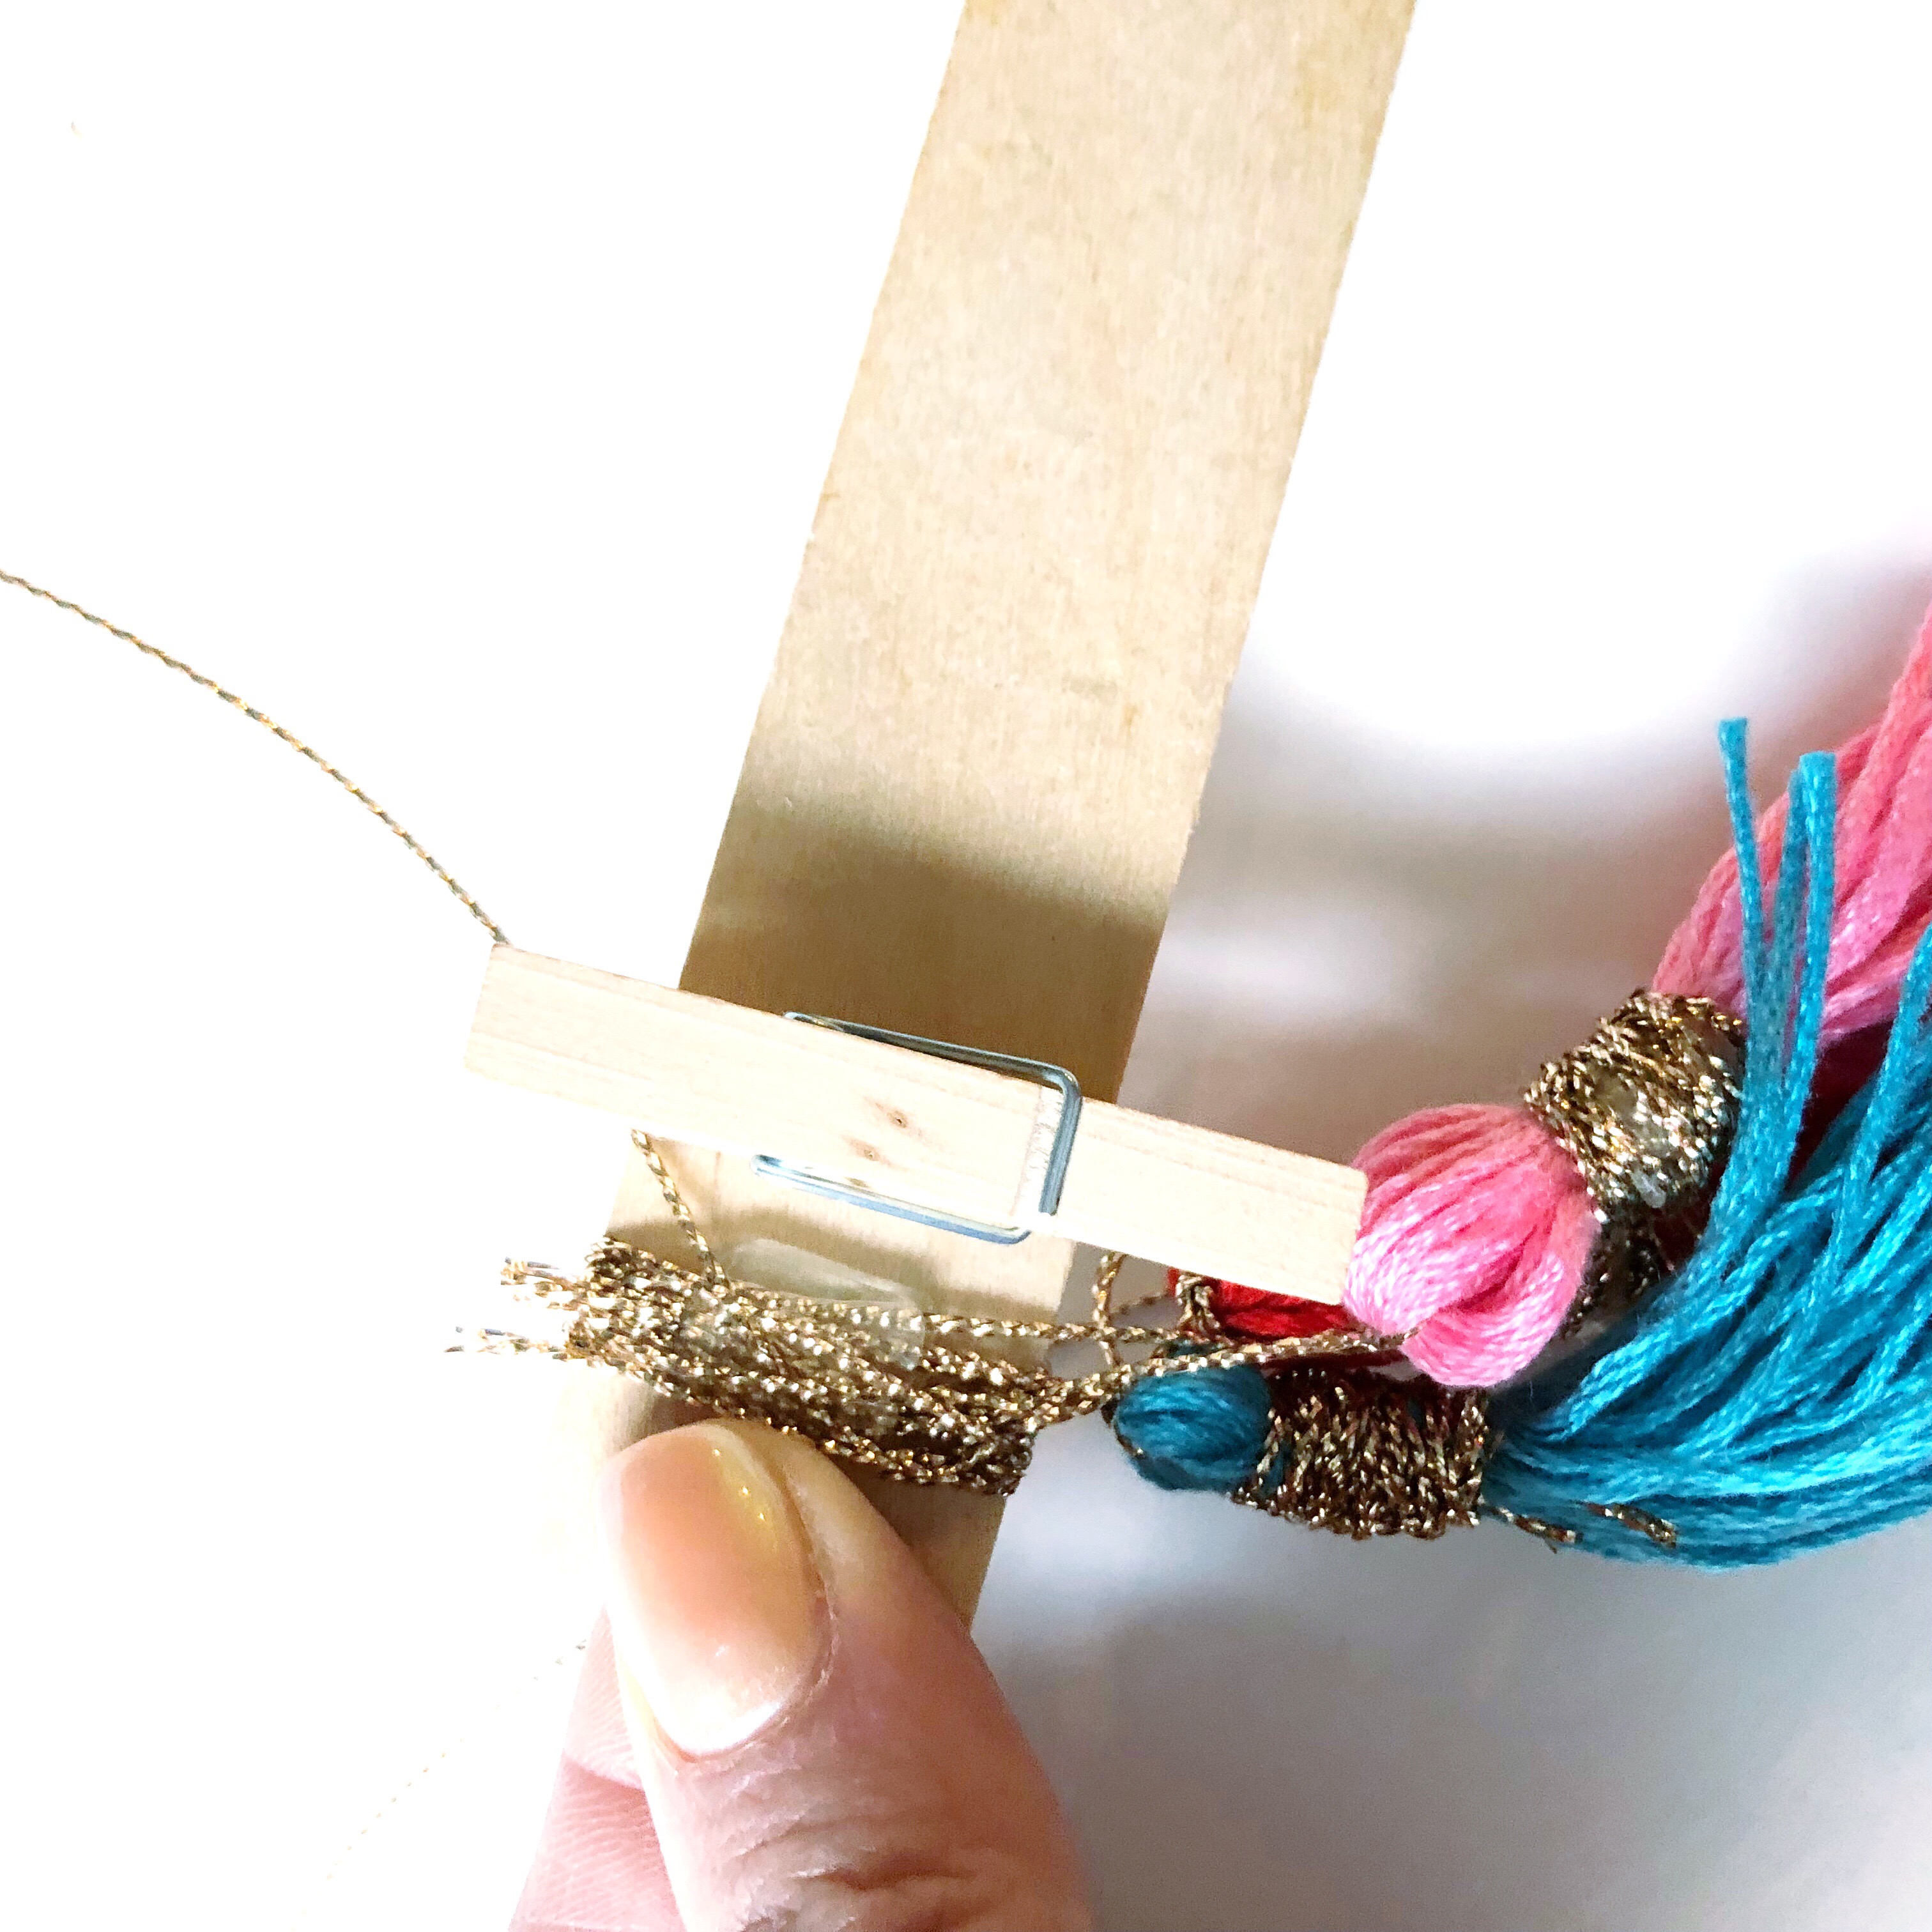 Lauren Fitzmaurice of @renmadecalligraphy shares step by step directions on how to create your own DIY colorful Tassel Quote Holder.